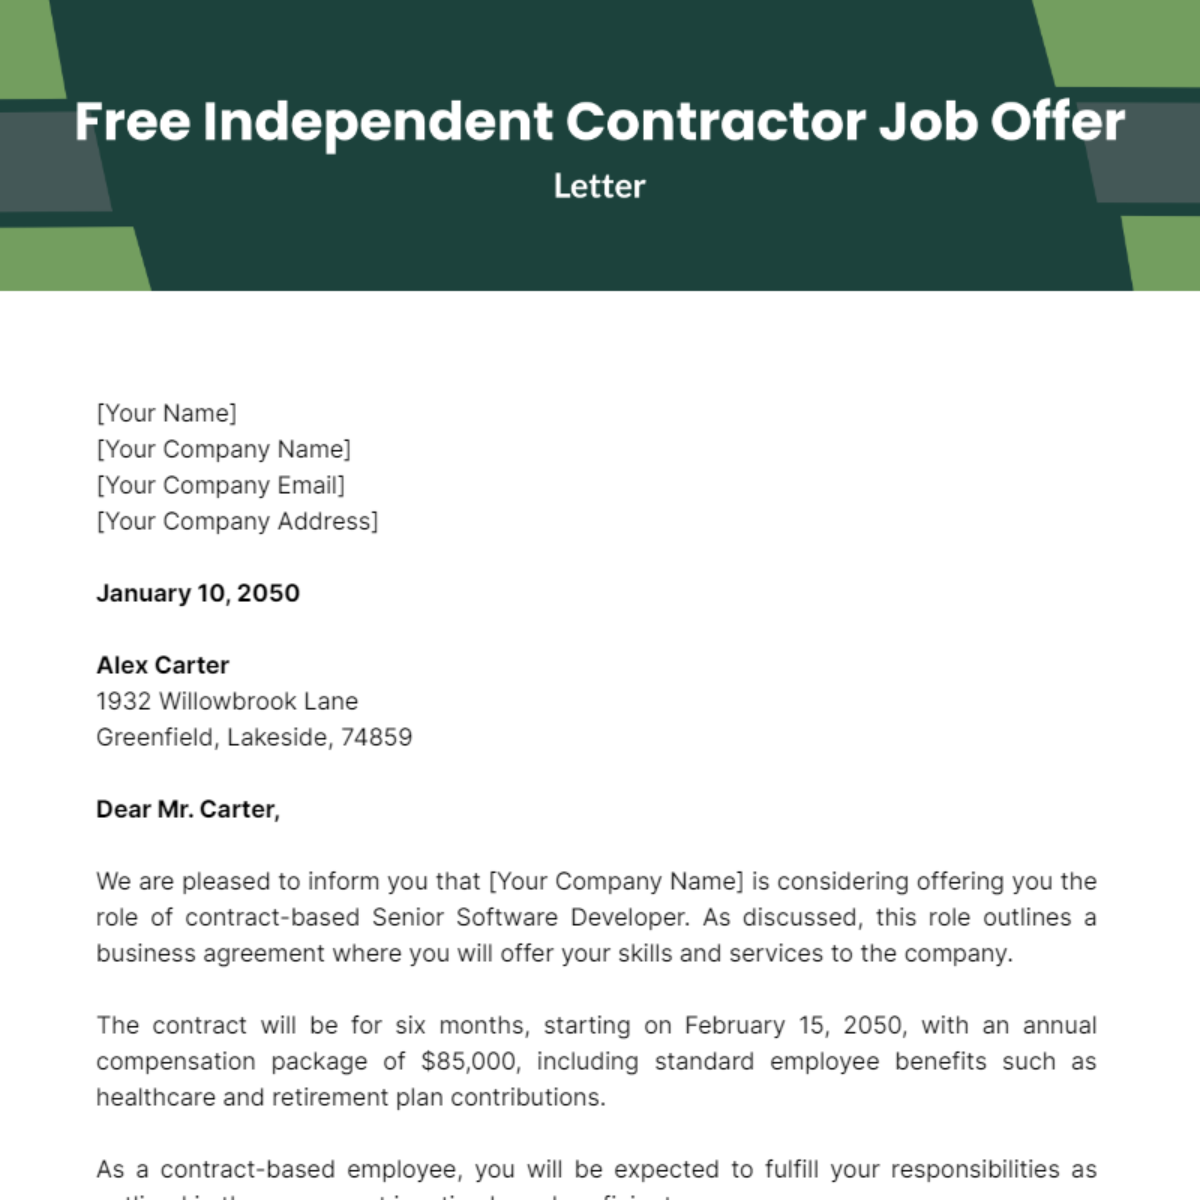 Independent Contractor Job Offer Letter Template